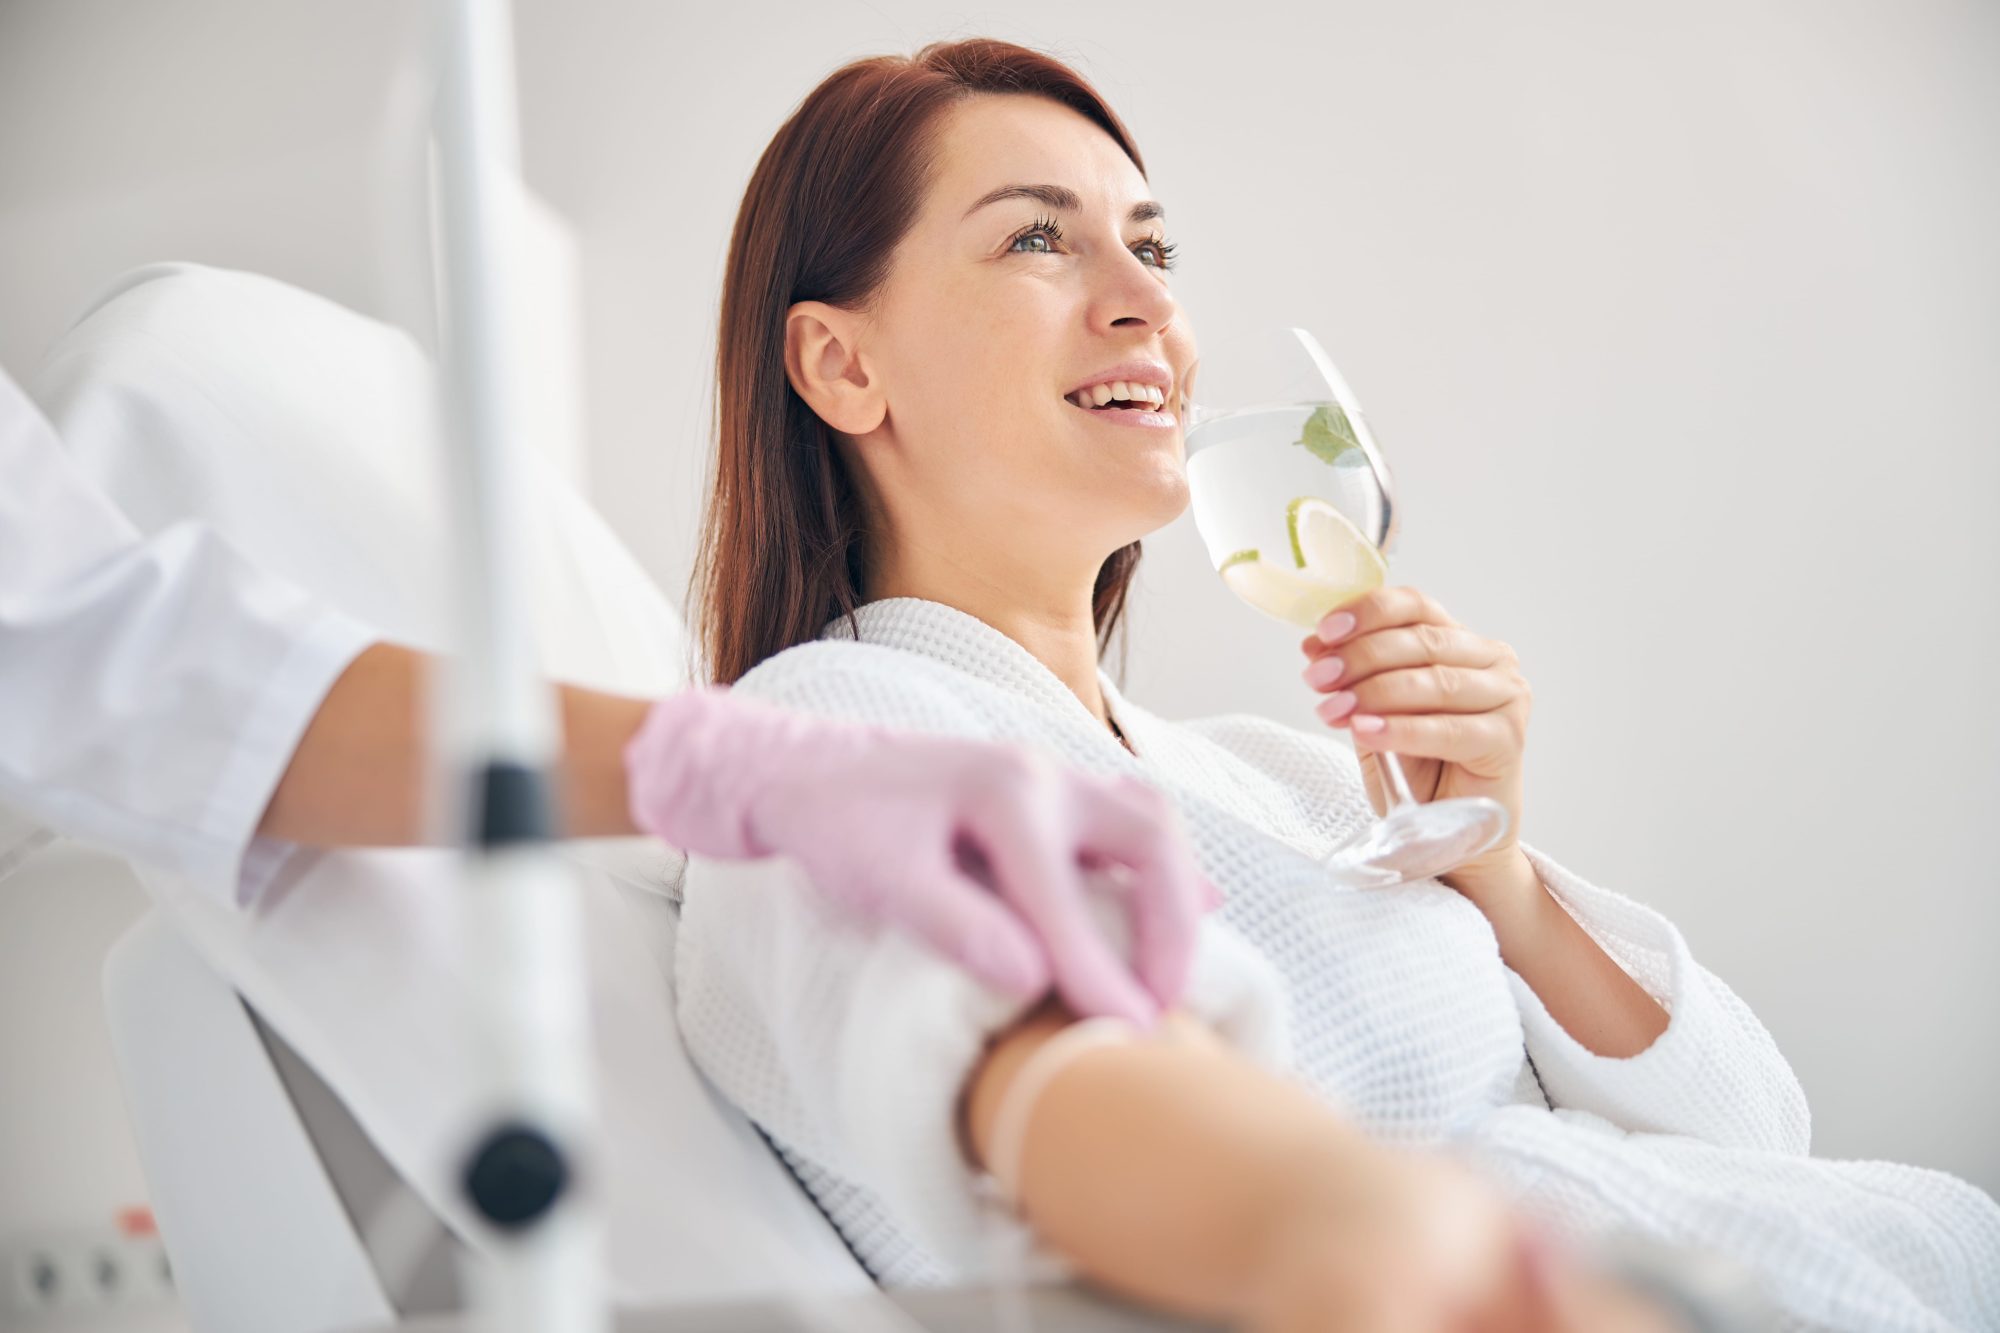 Woman smiling while getting IV therapy.